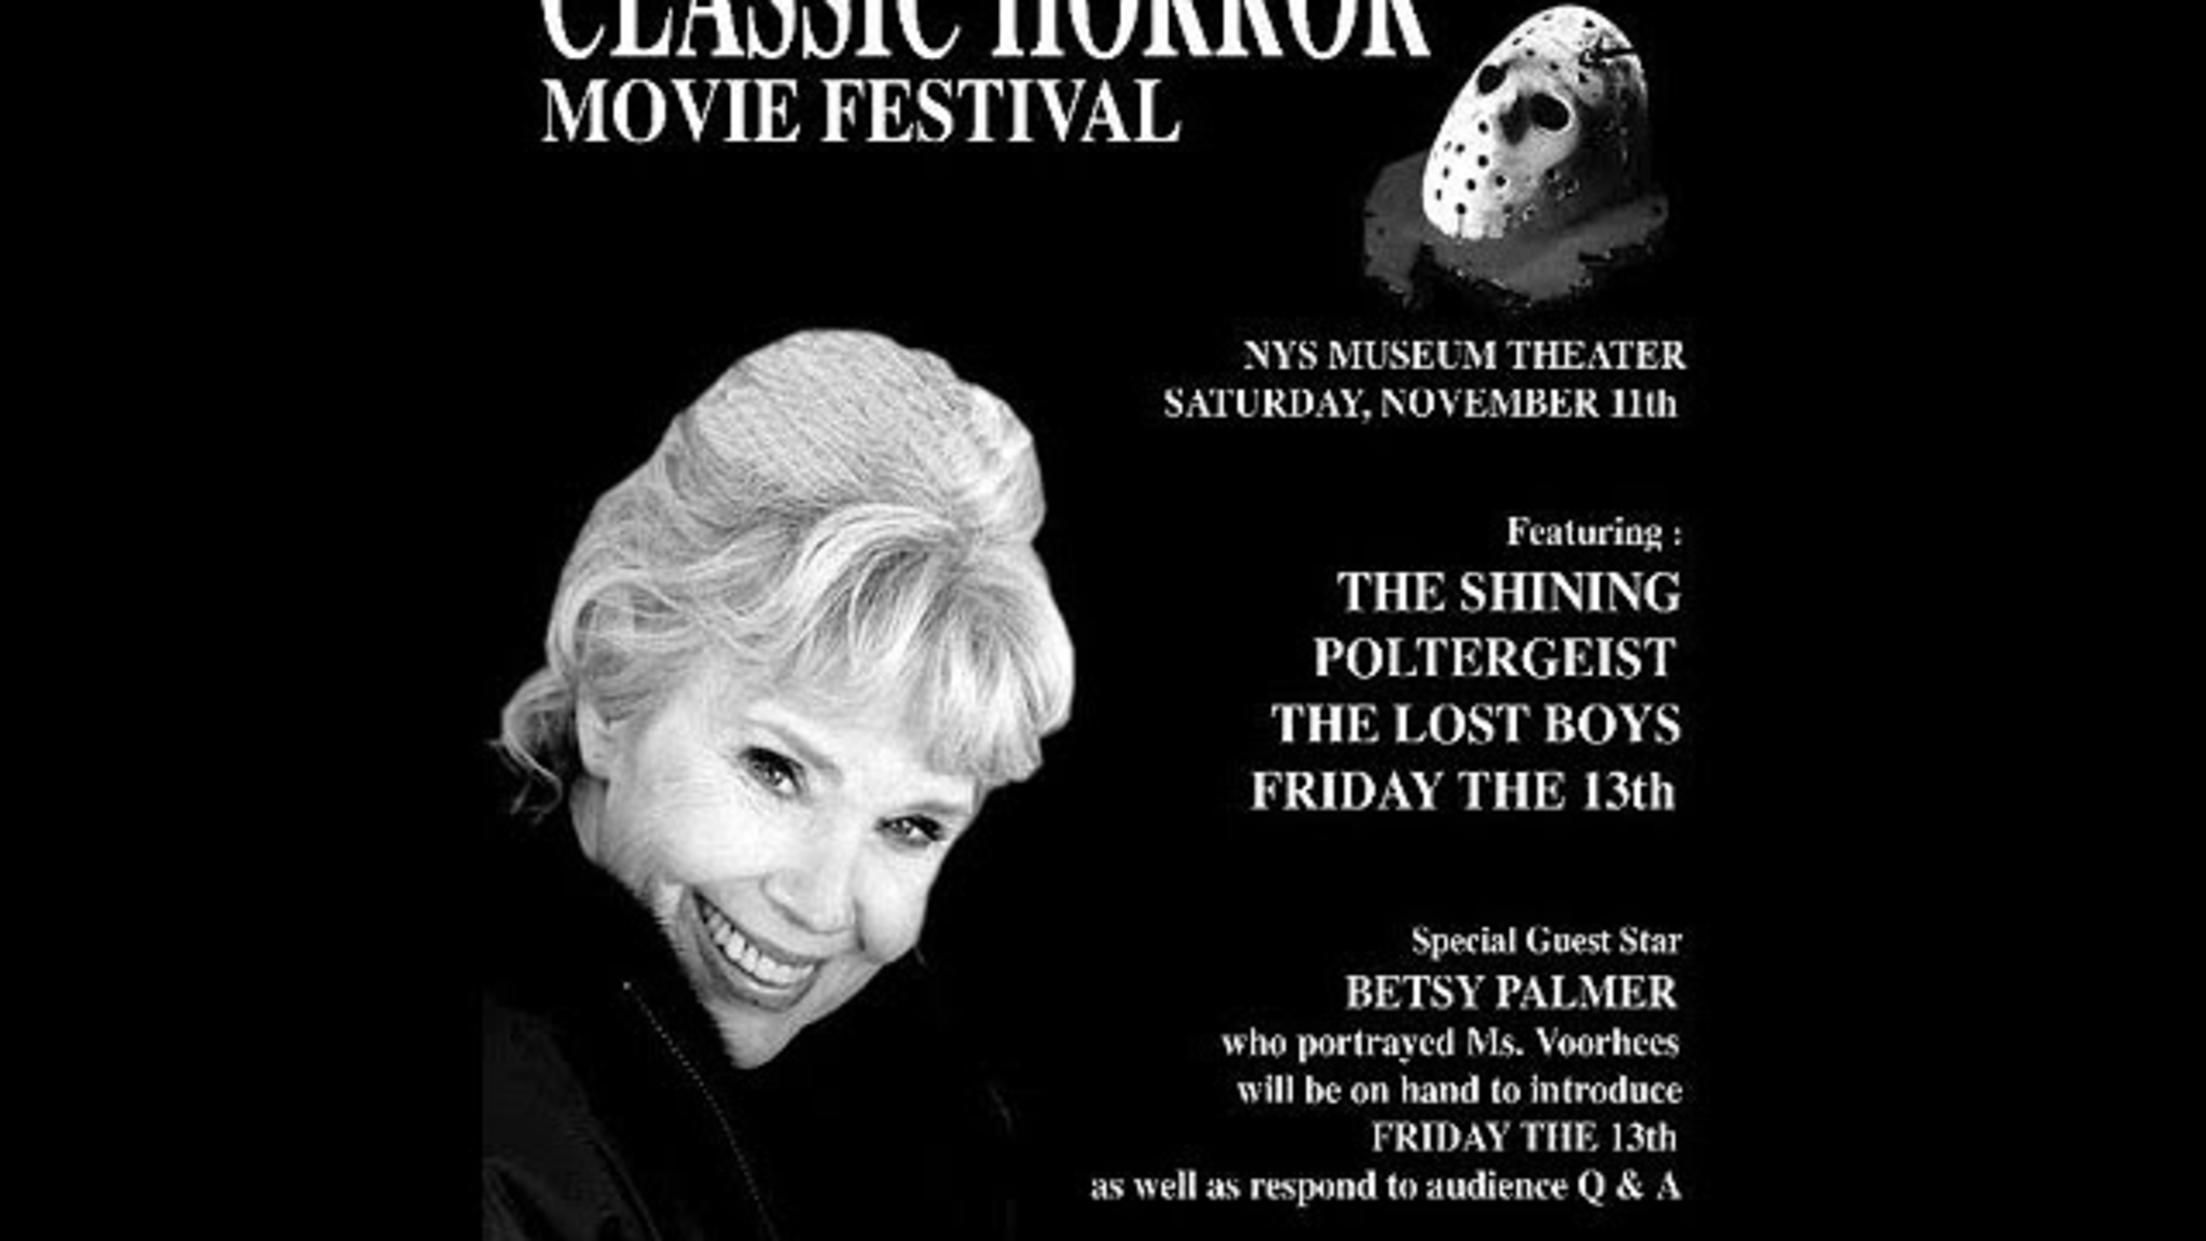 Betsy Palmer discusses Friday the 13th